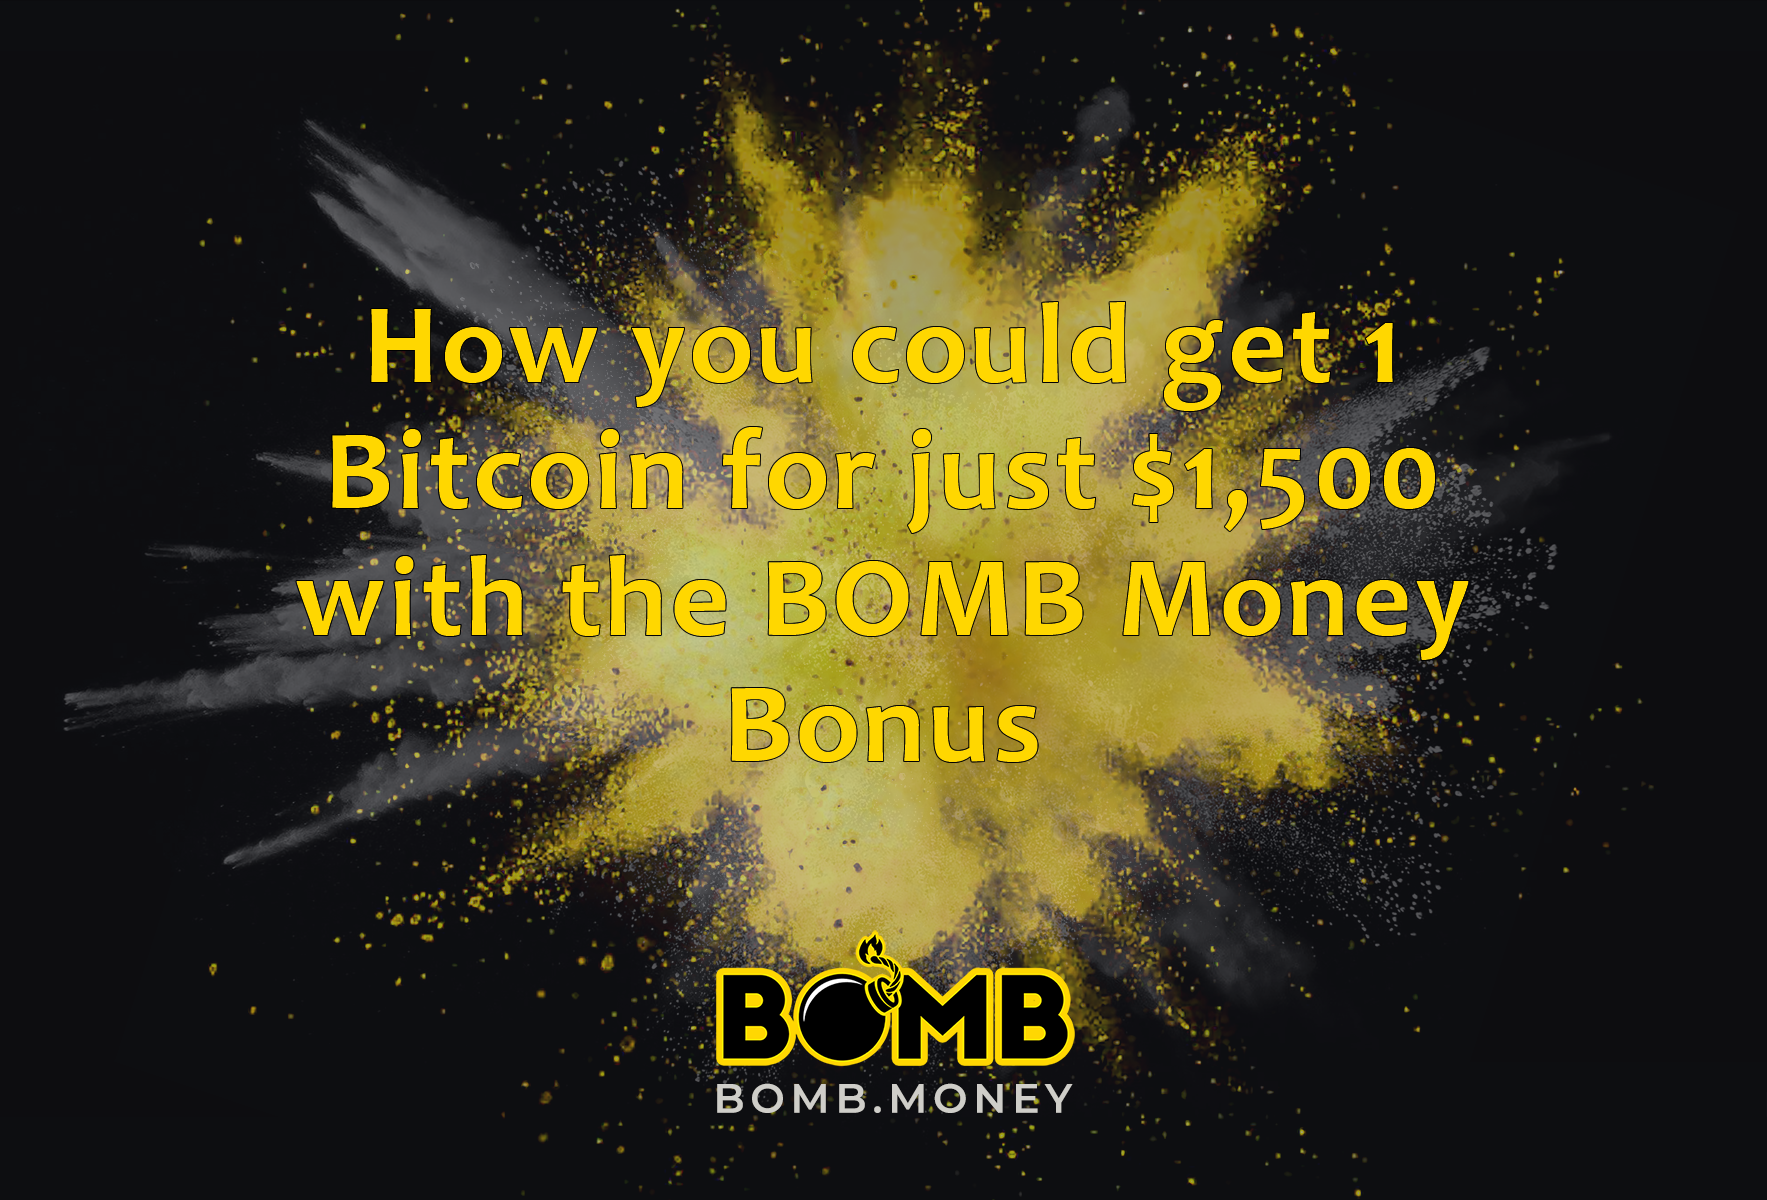 How you could get 1 Bitcoin for just $1,500 with the BOMB Money Bonus